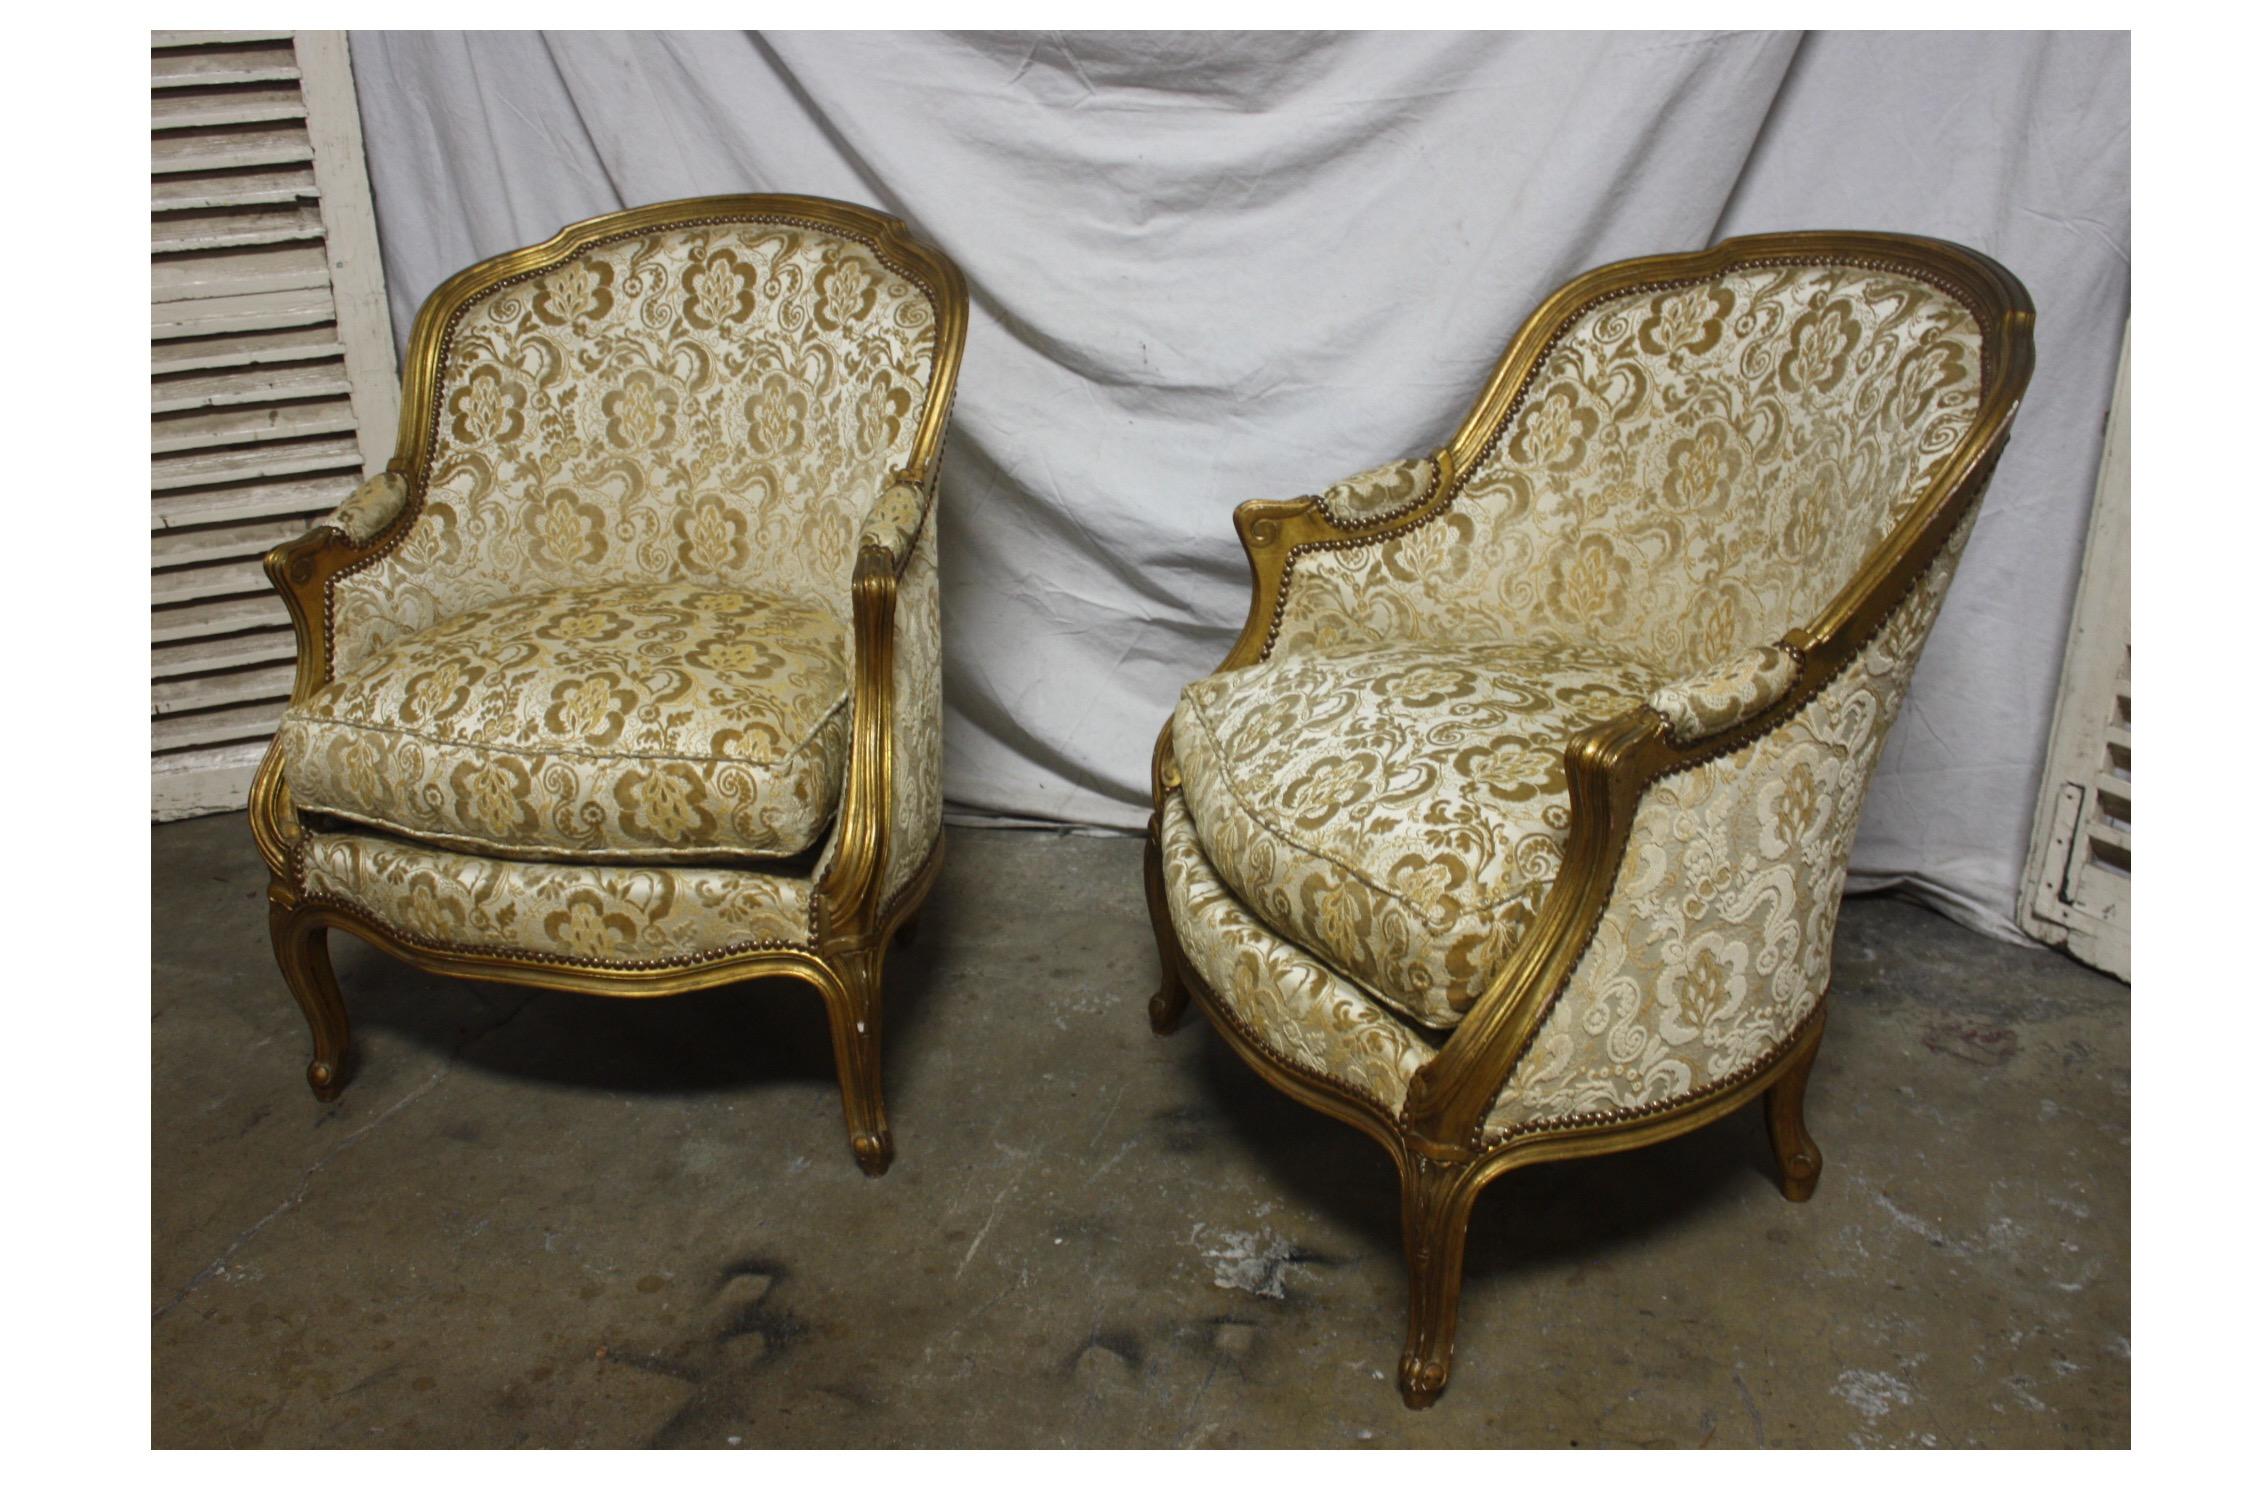 bergere chairs for sale